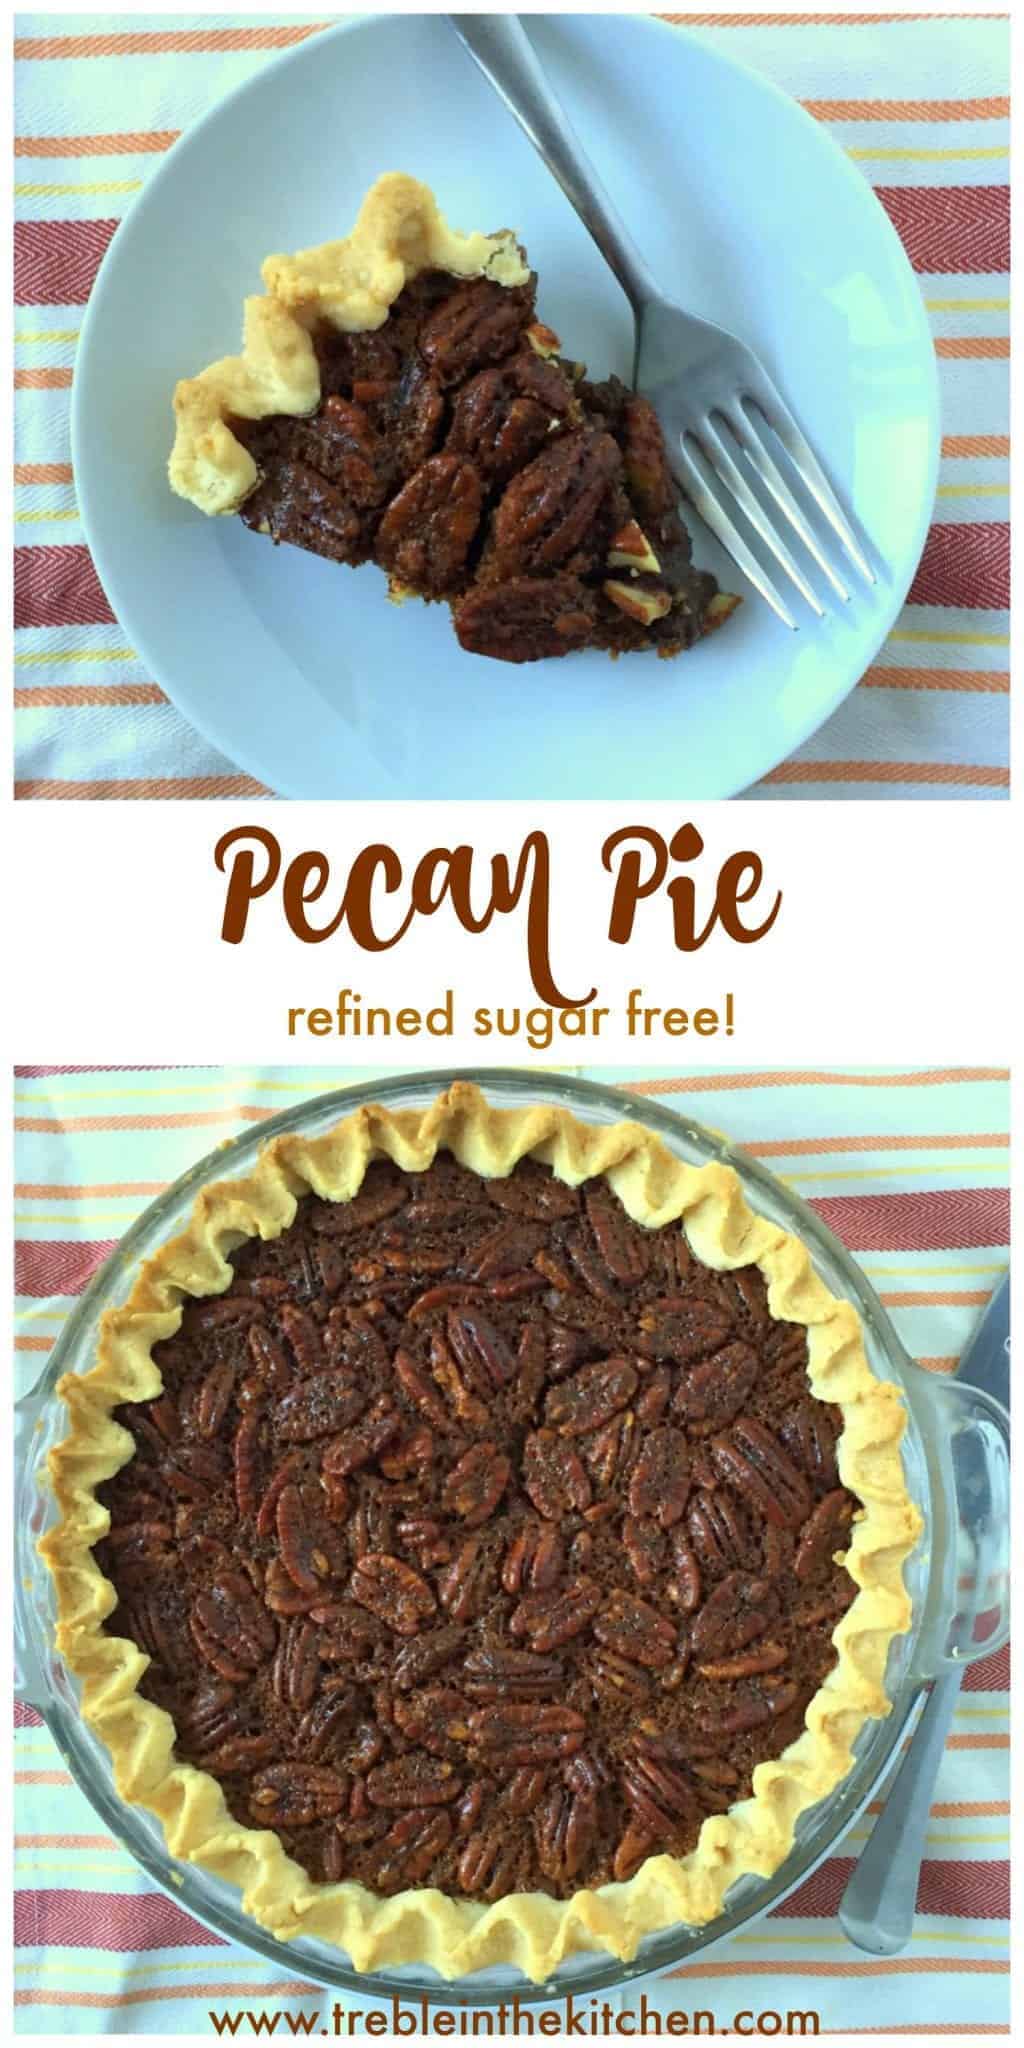 Pecan Pie from Treble in the Kitchen